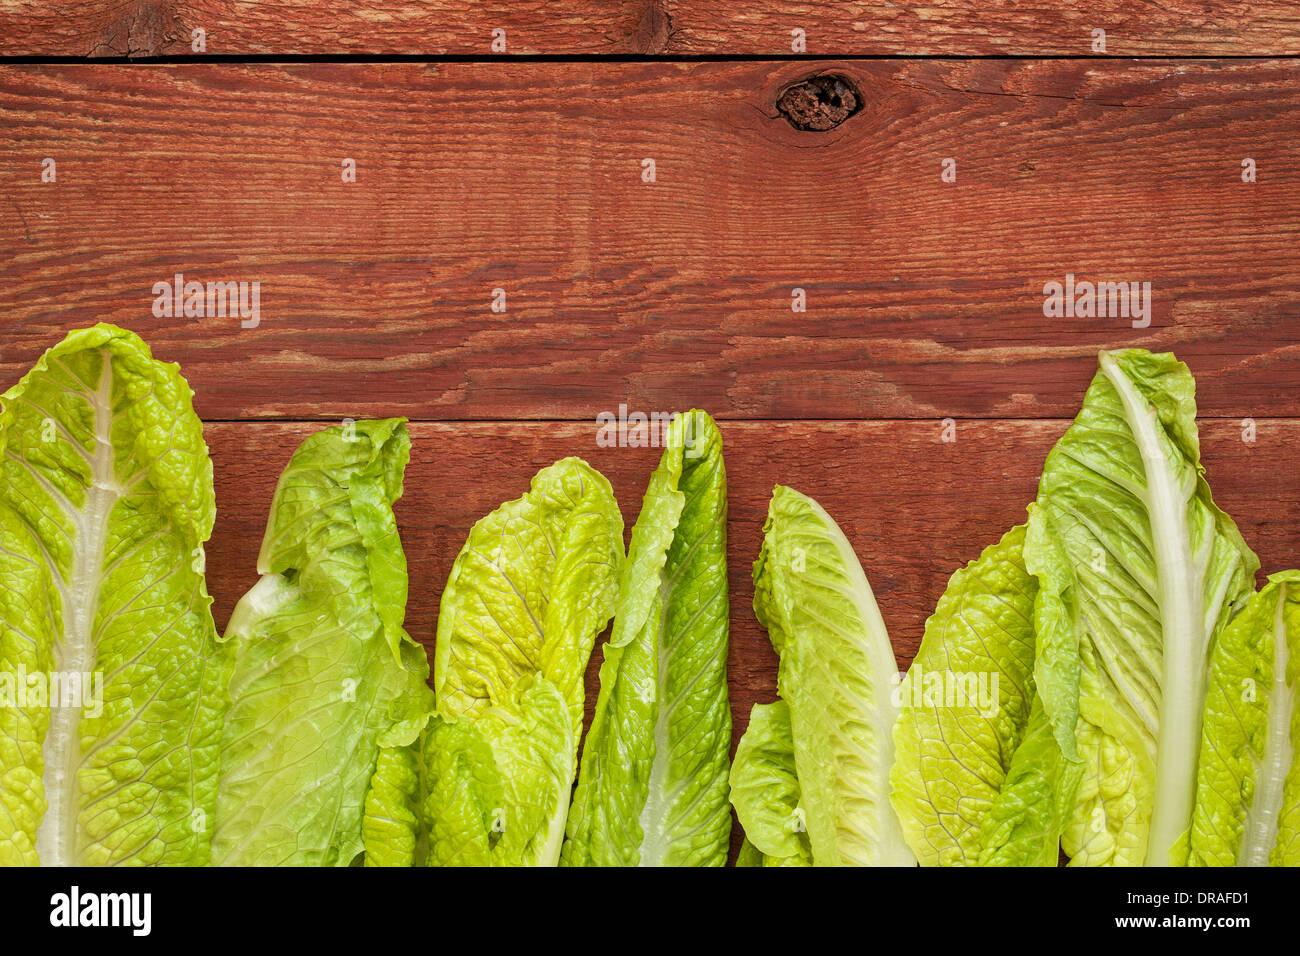 fresh green leaves of romaine lettuce against a grunge rustic barn wood table Stock Photo